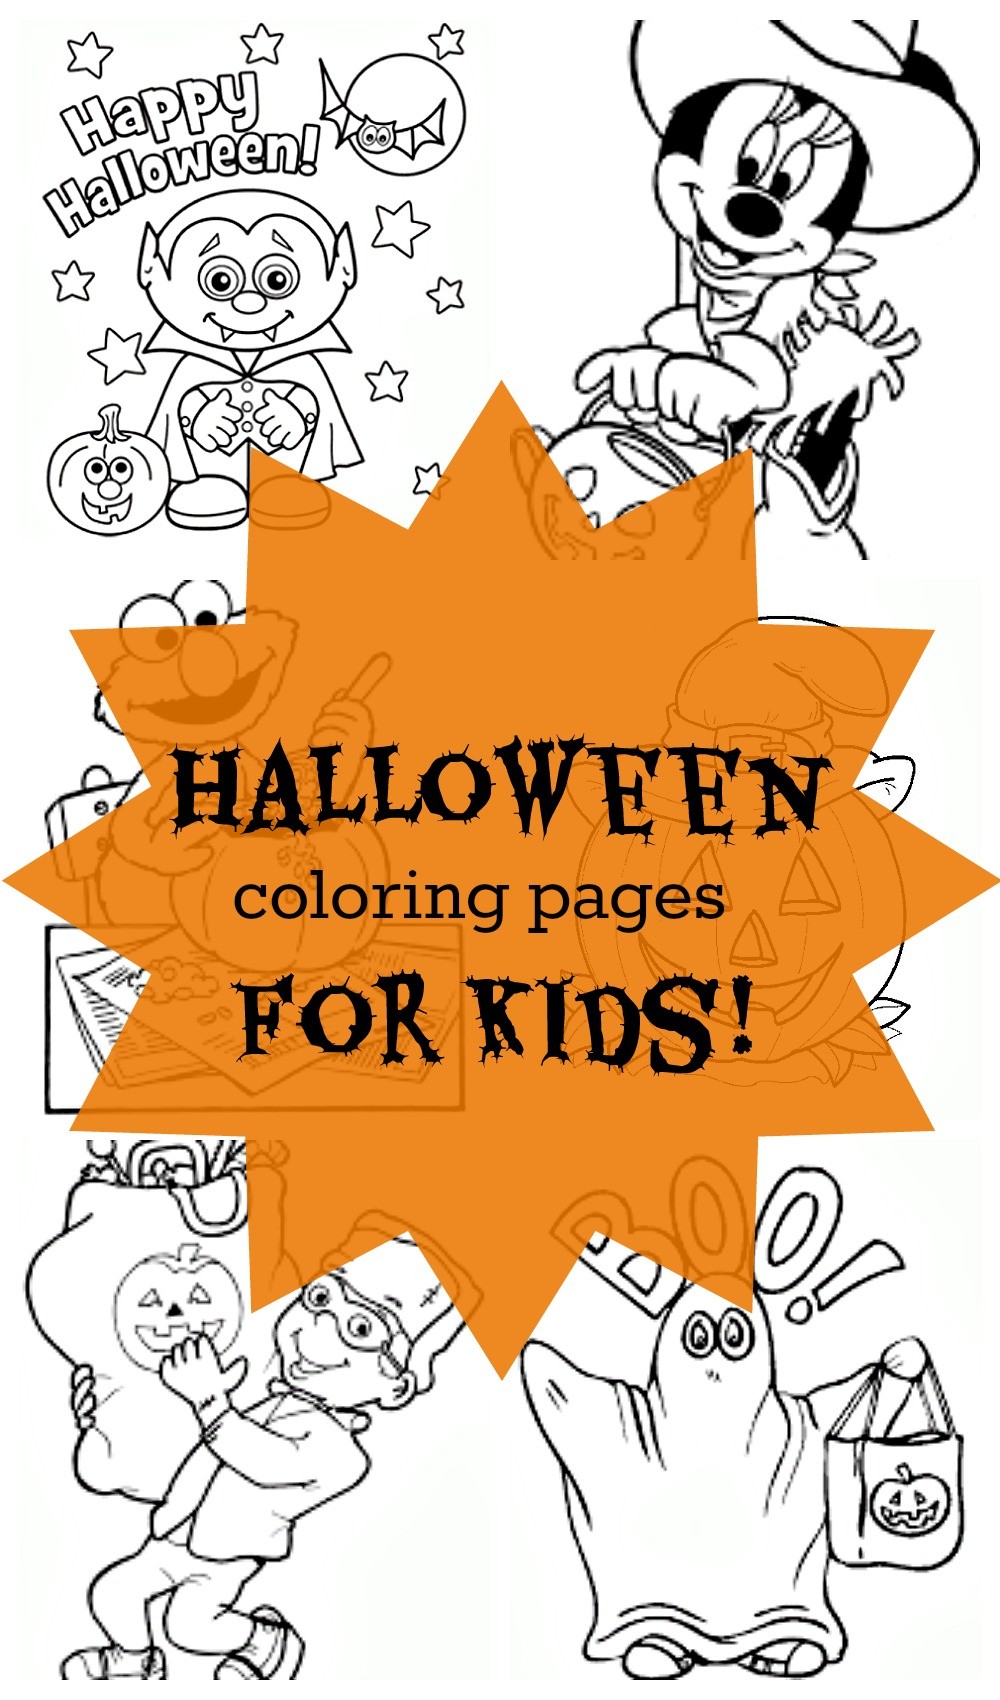 View Coloring Pages Halloween Images COLORIST